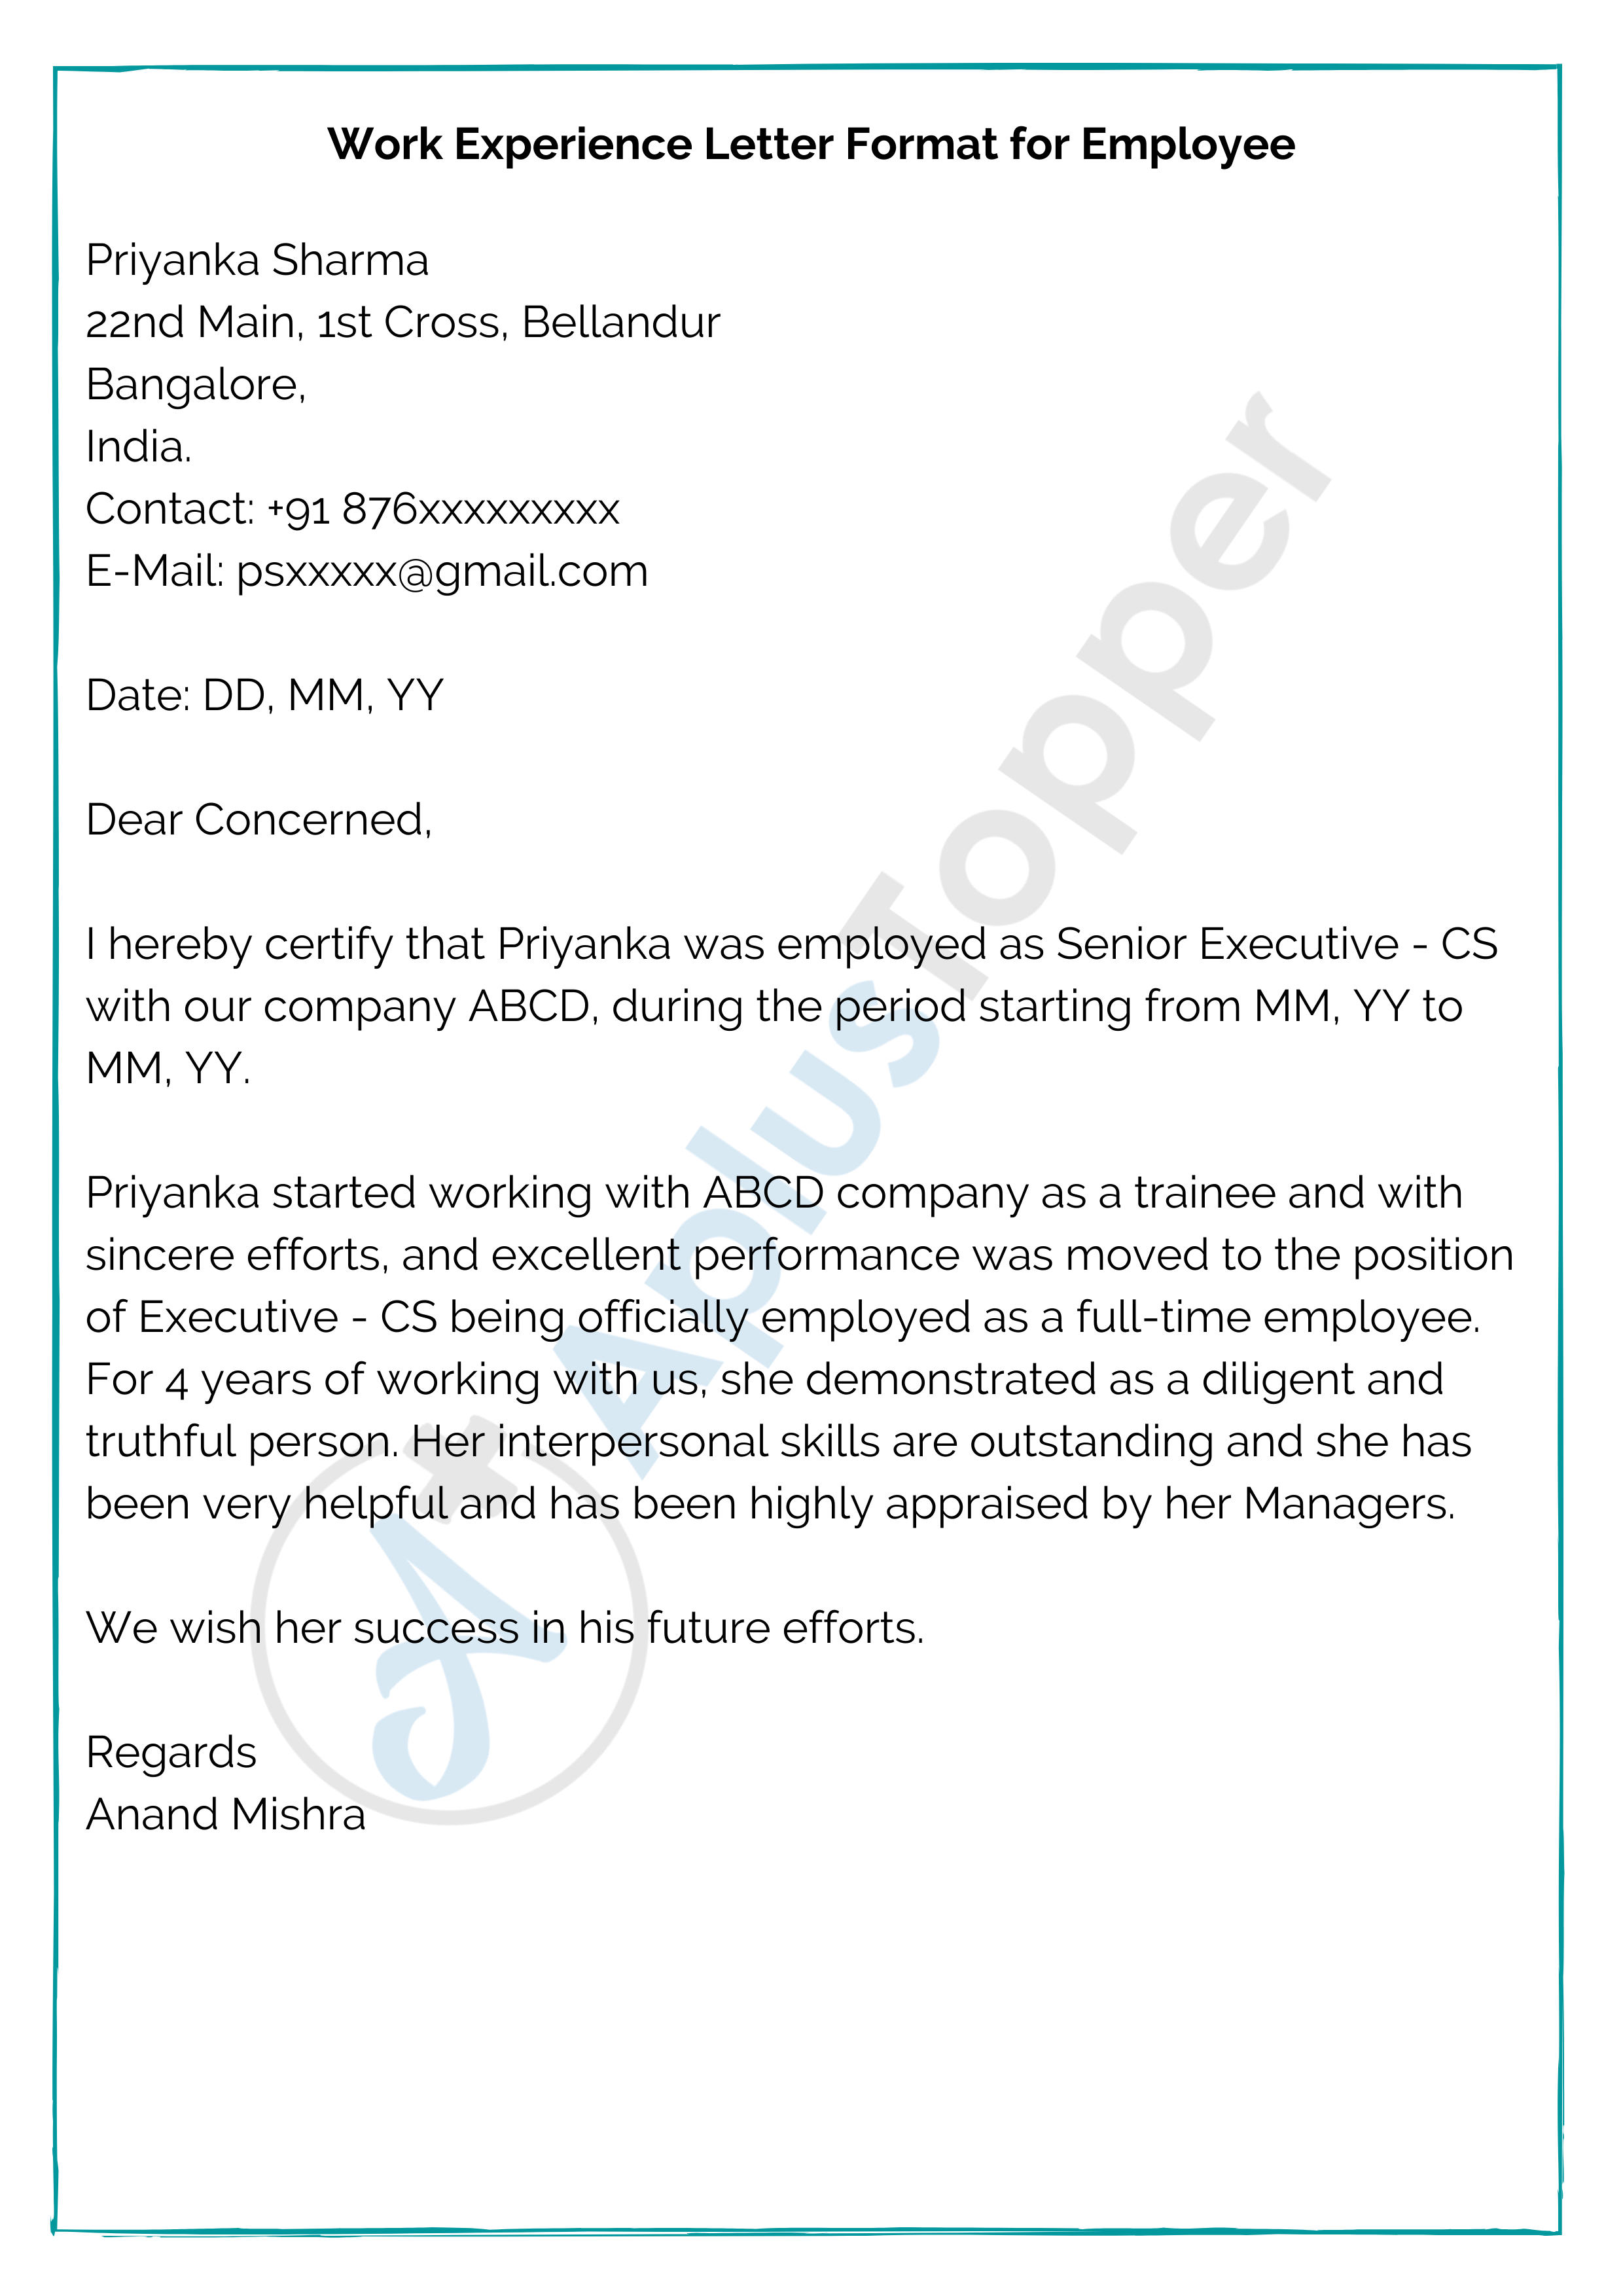 work experience letter healthcare